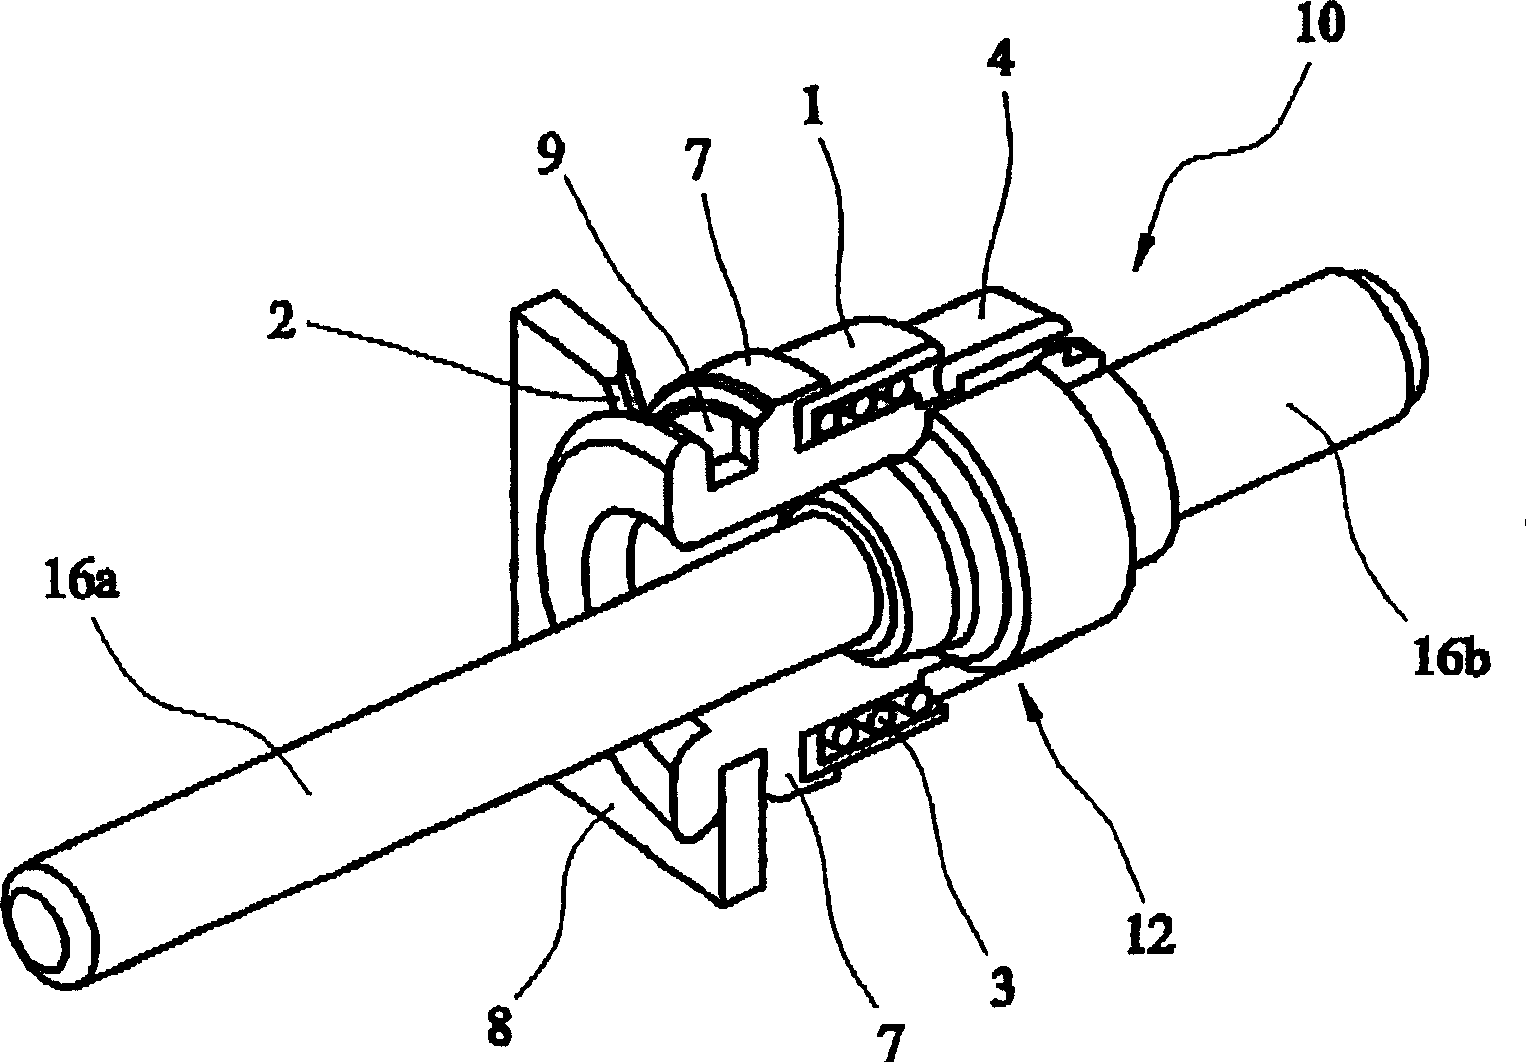 Anchoring means for the sheath of a bowden cable